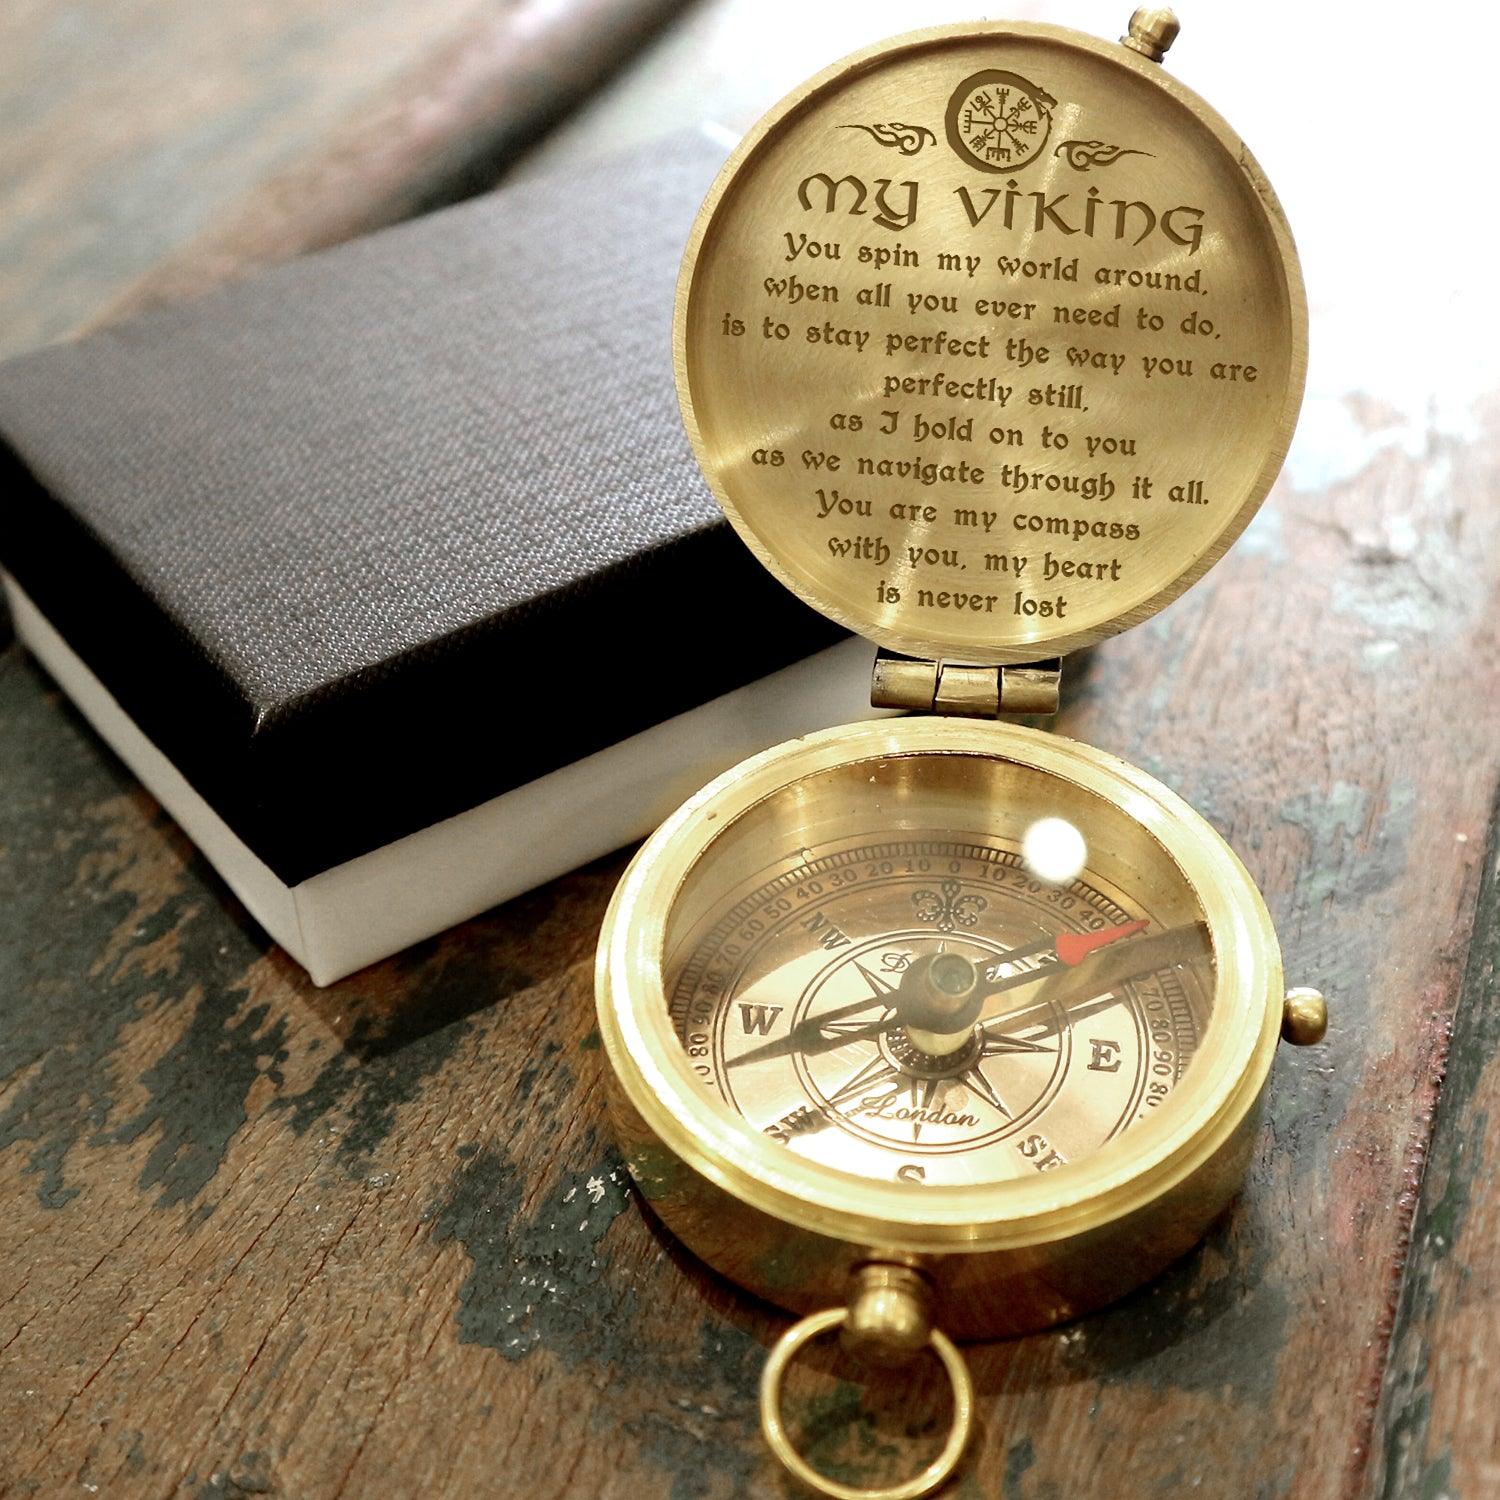 Engraved Compass - Viking - To My Man - You Spin My World Around - Augpb26039 - Gifts Holder